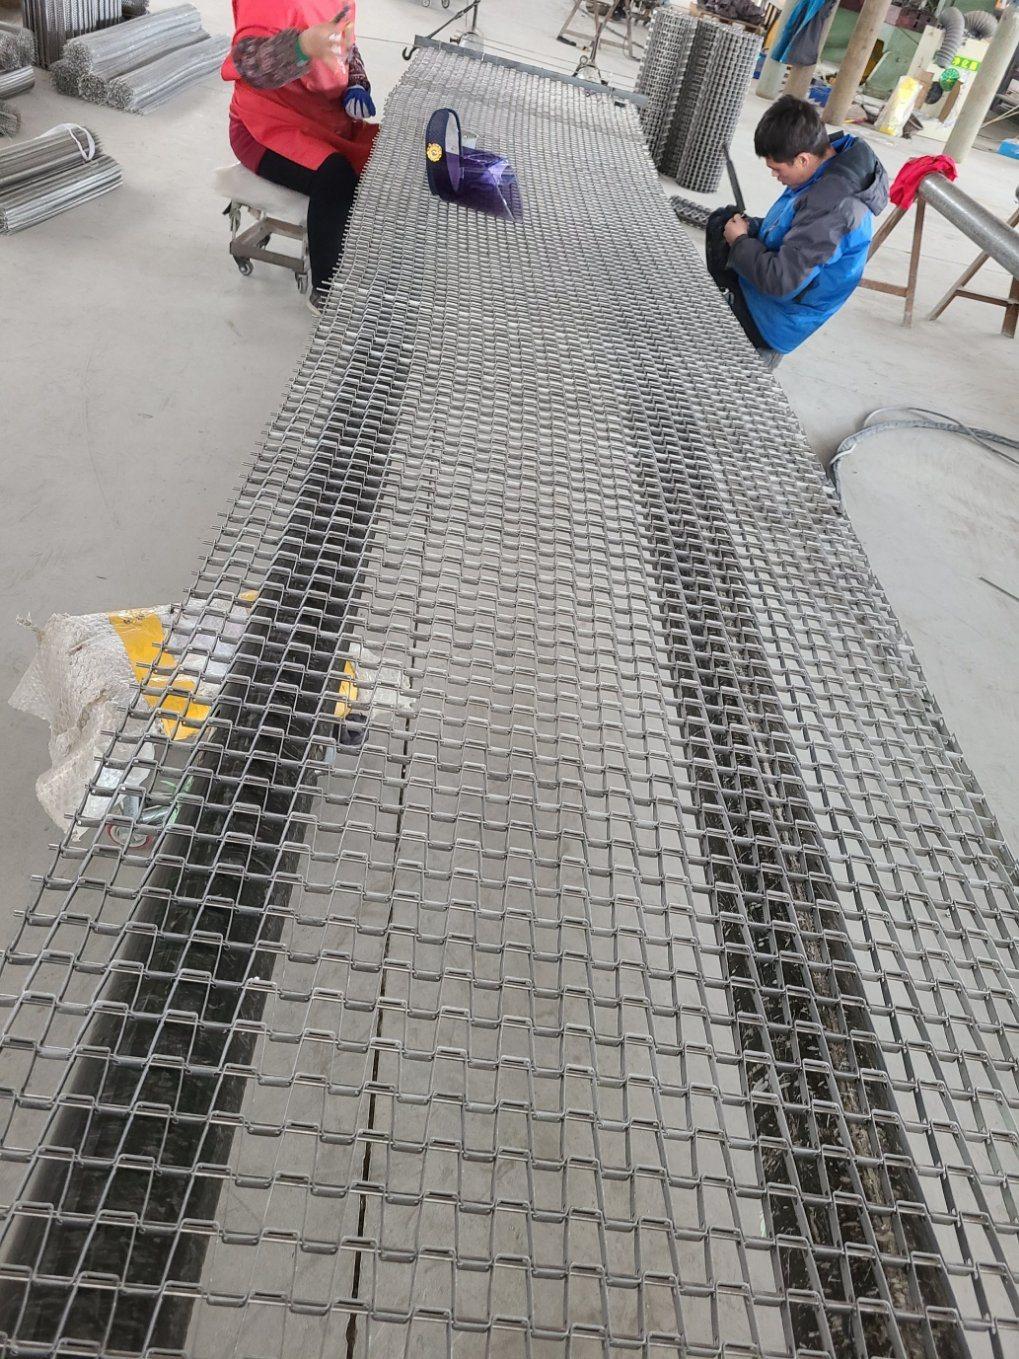 New Arrival Stainless Steel 304 304L 316 316L Twill Weave Stainless Steel Wire Mesh